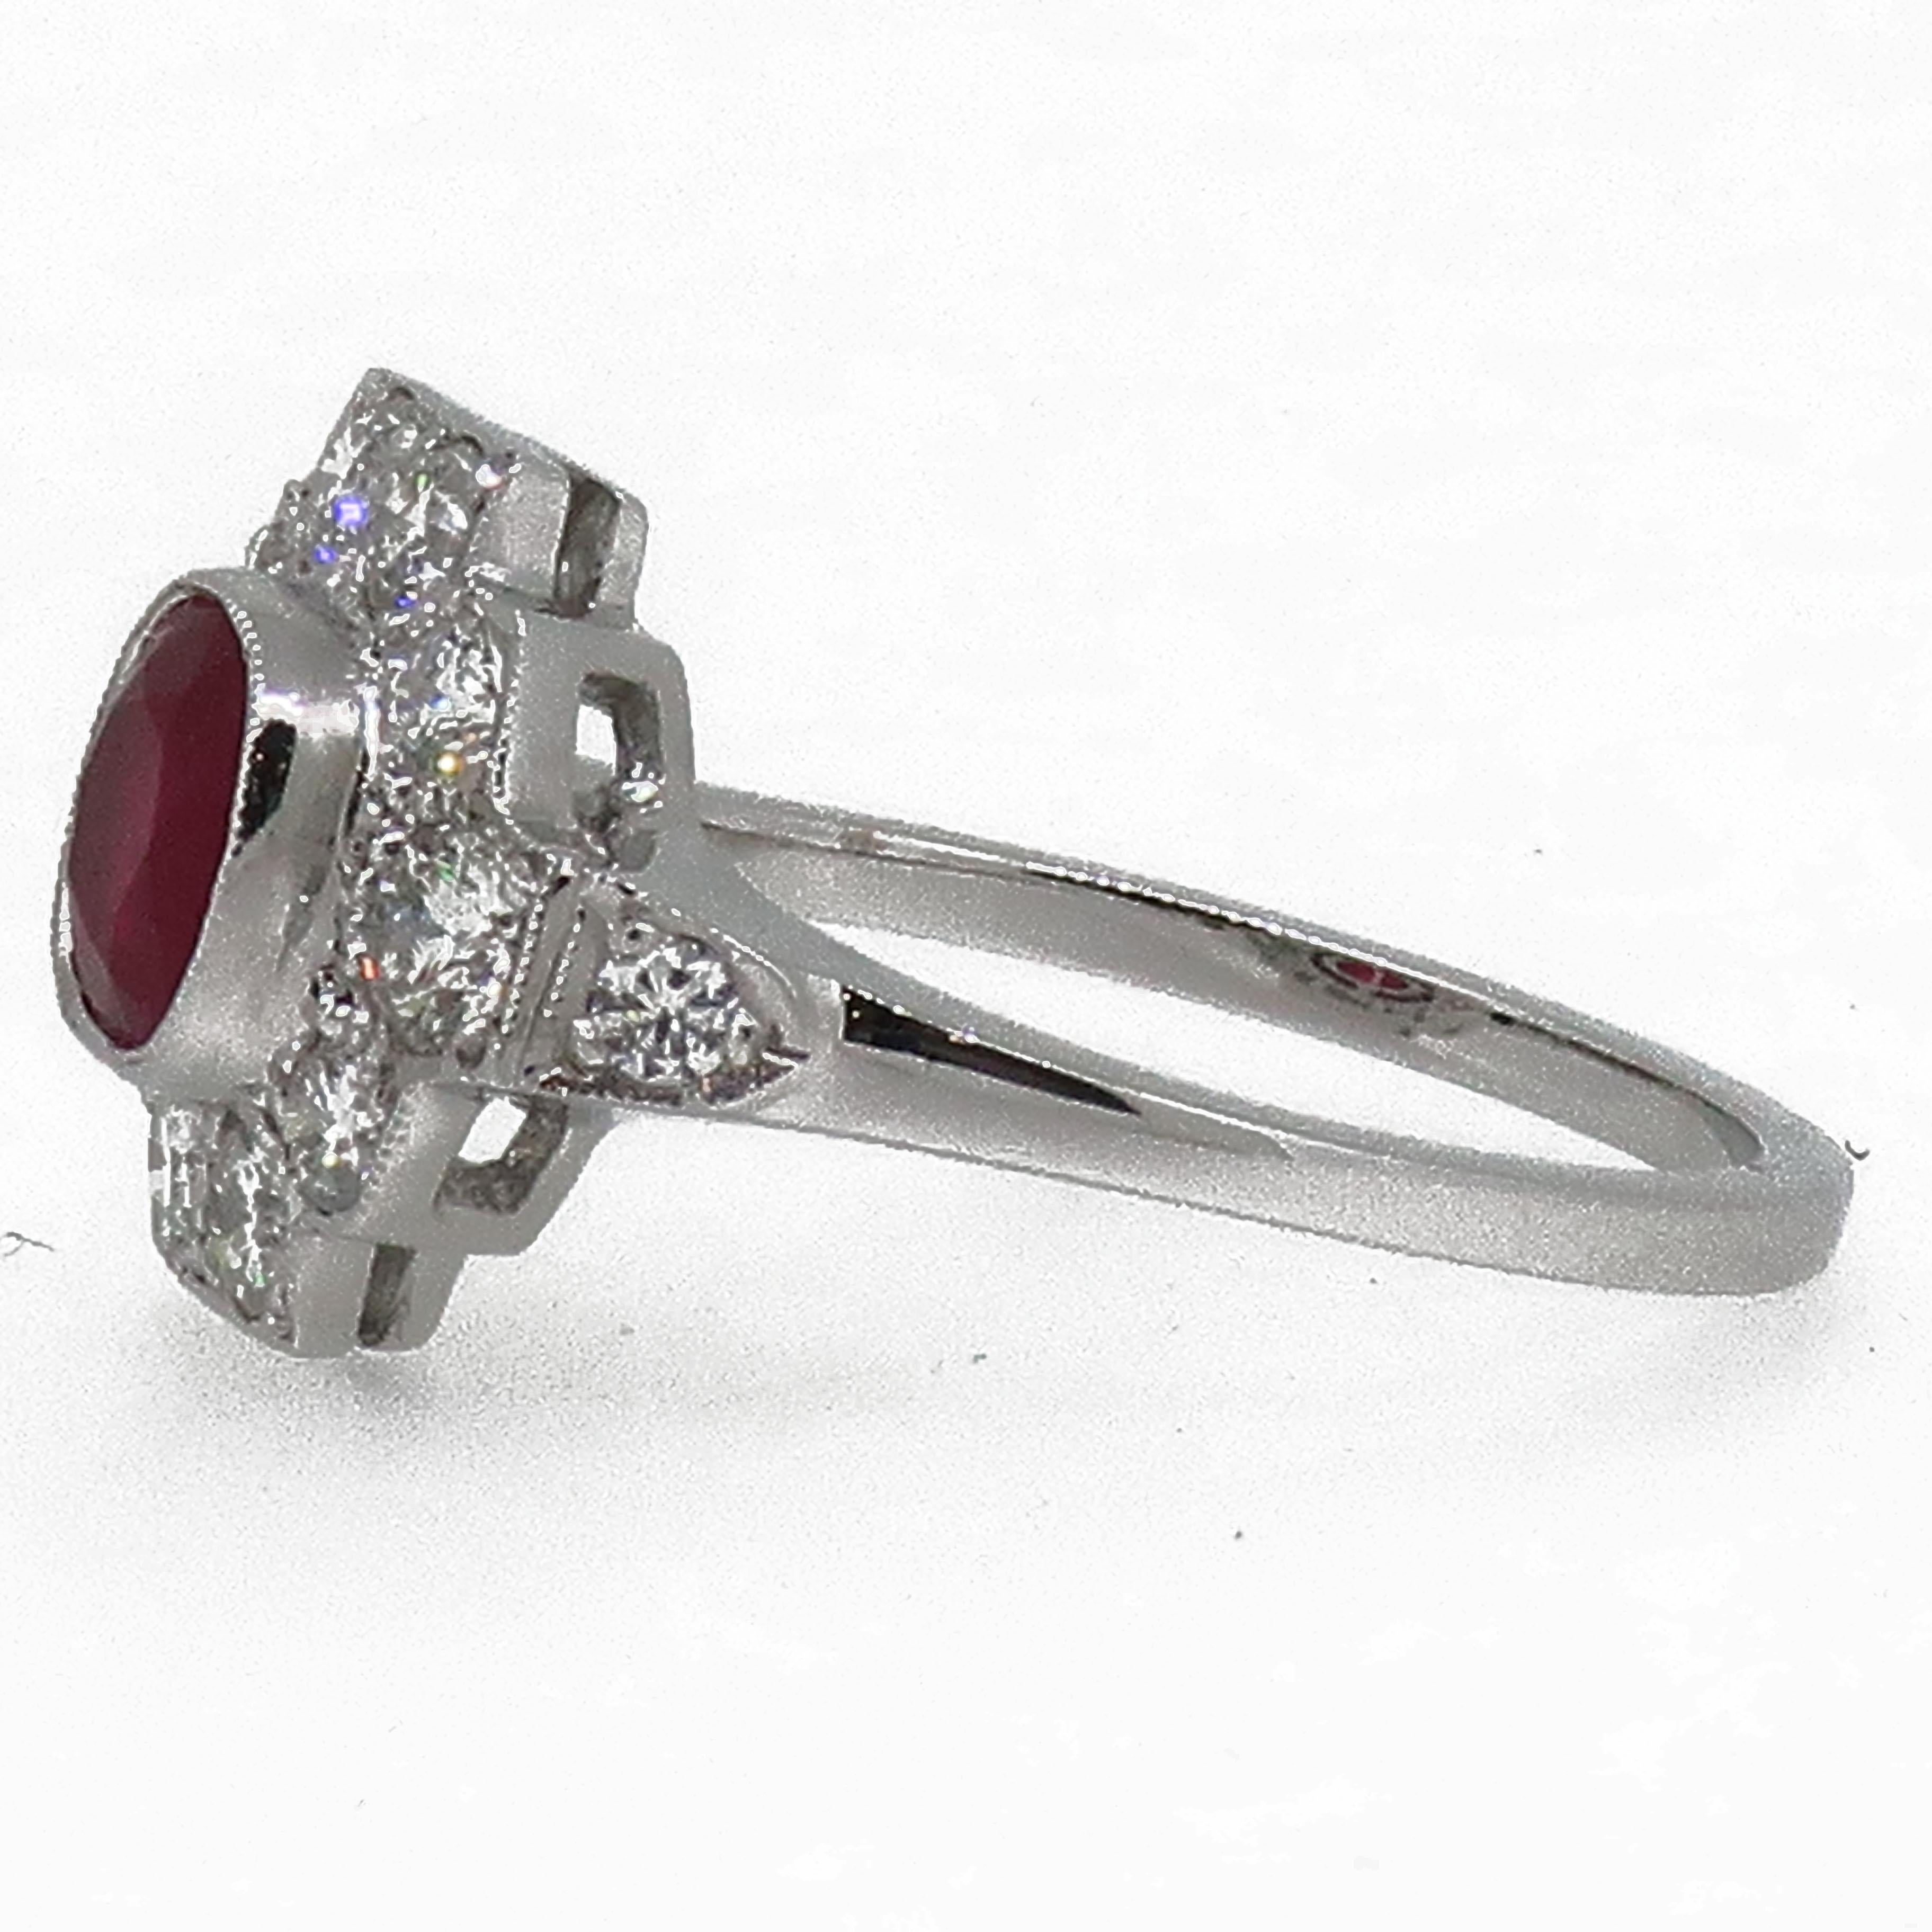 18 Karat Gold Cushion Cut Ruby & Diamond Art Deco Style Cluster Ring

An exquisite 1.03ct pigeon blood red cushion cut ruby ring. Central ruby is encased in a fine mill-grain bezel setting , surrounded by ten round brilliant cut diamonds, flowing on